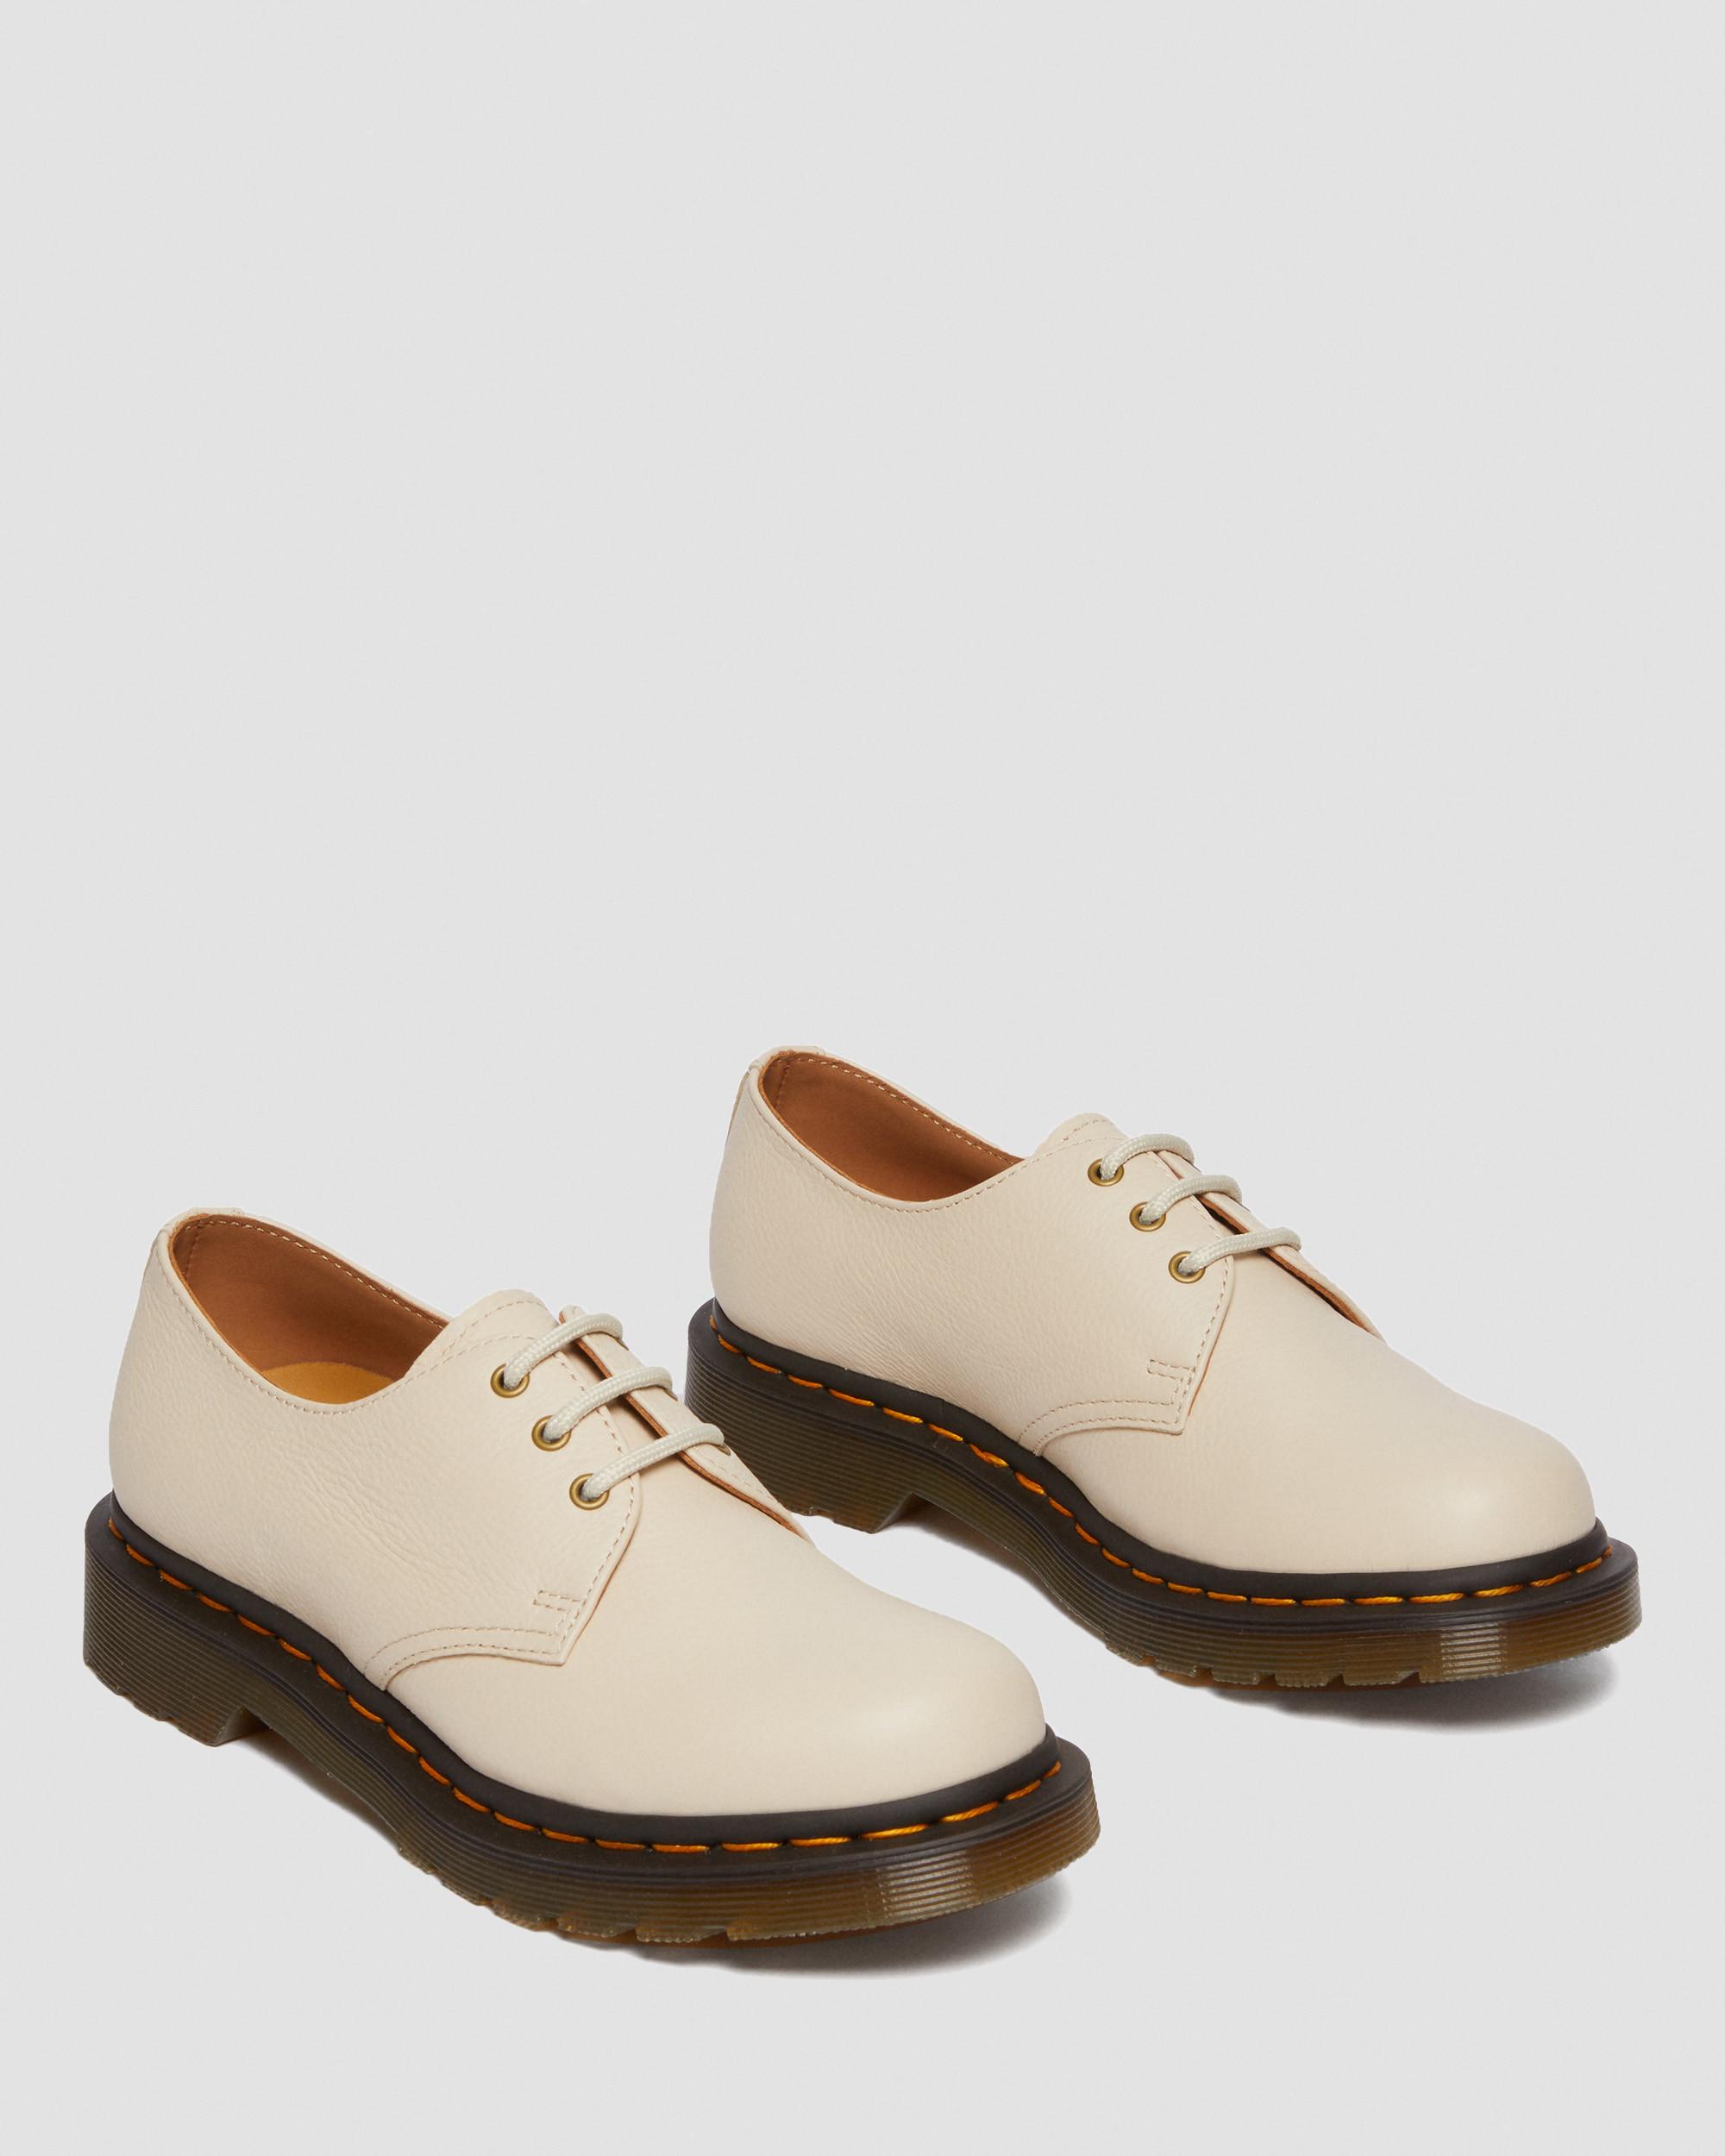 1461 Virginia Leather Oxford Shoes1461 Virginia Leather Oxford Shoes Dr. Martens